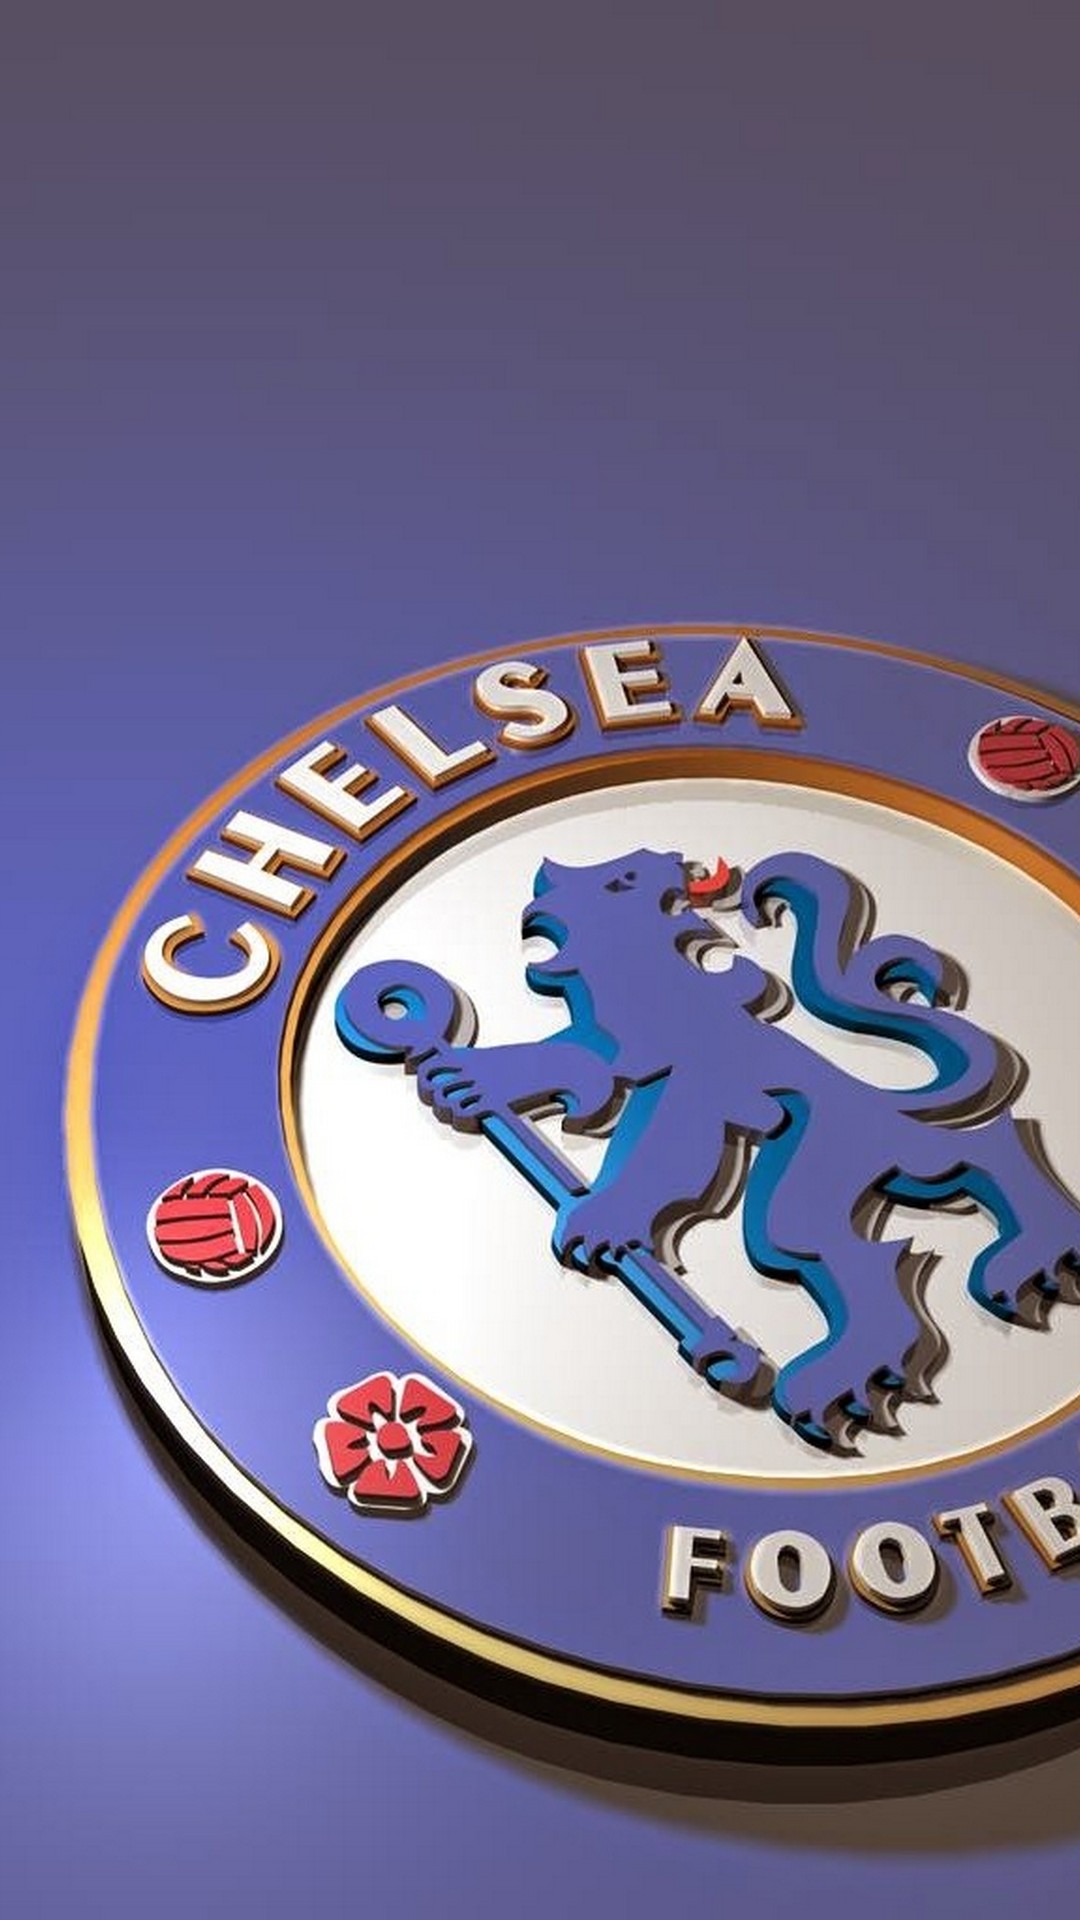 iPhone Wallpaper HD Chelsea Football Club With Resolution 1080X1920 pixel. You can make this wallpaper for your Mac or Windows Desktop Background, iPhone, Android or Tablet and another Smartphone device for free